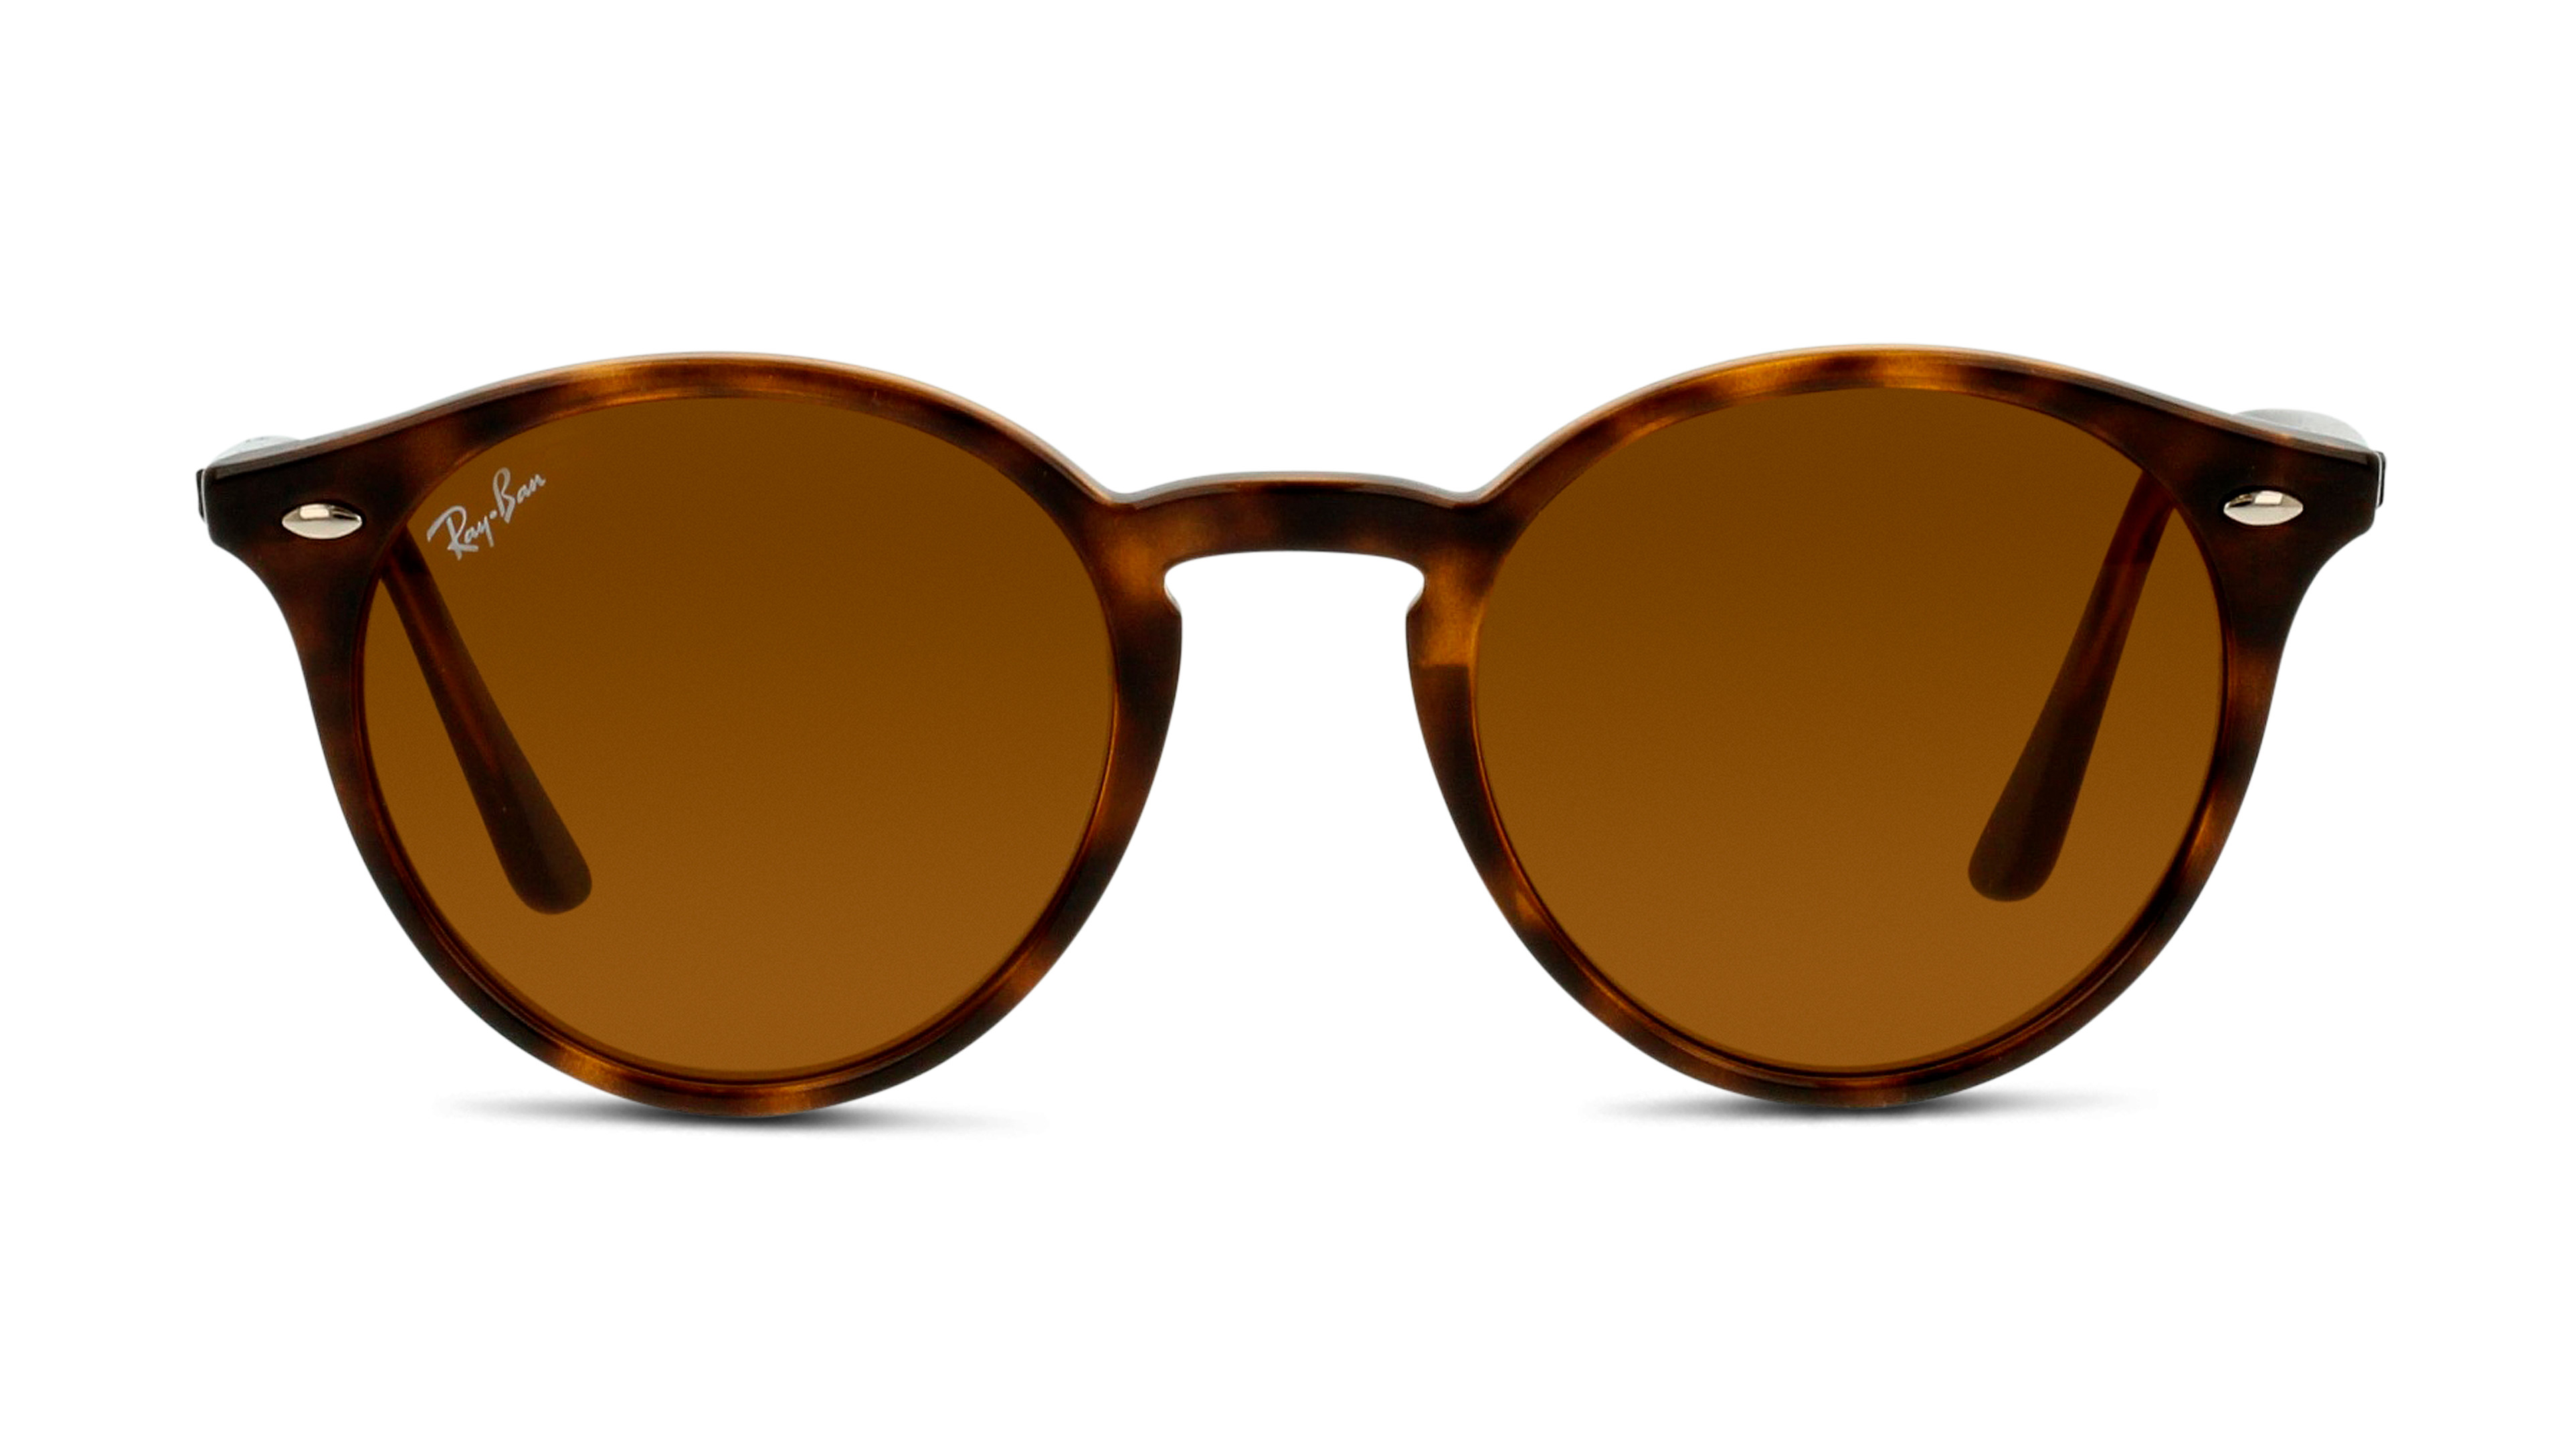 [products.image.front] Ray-Ban 0RB2180 710/73 Sonnenbrille